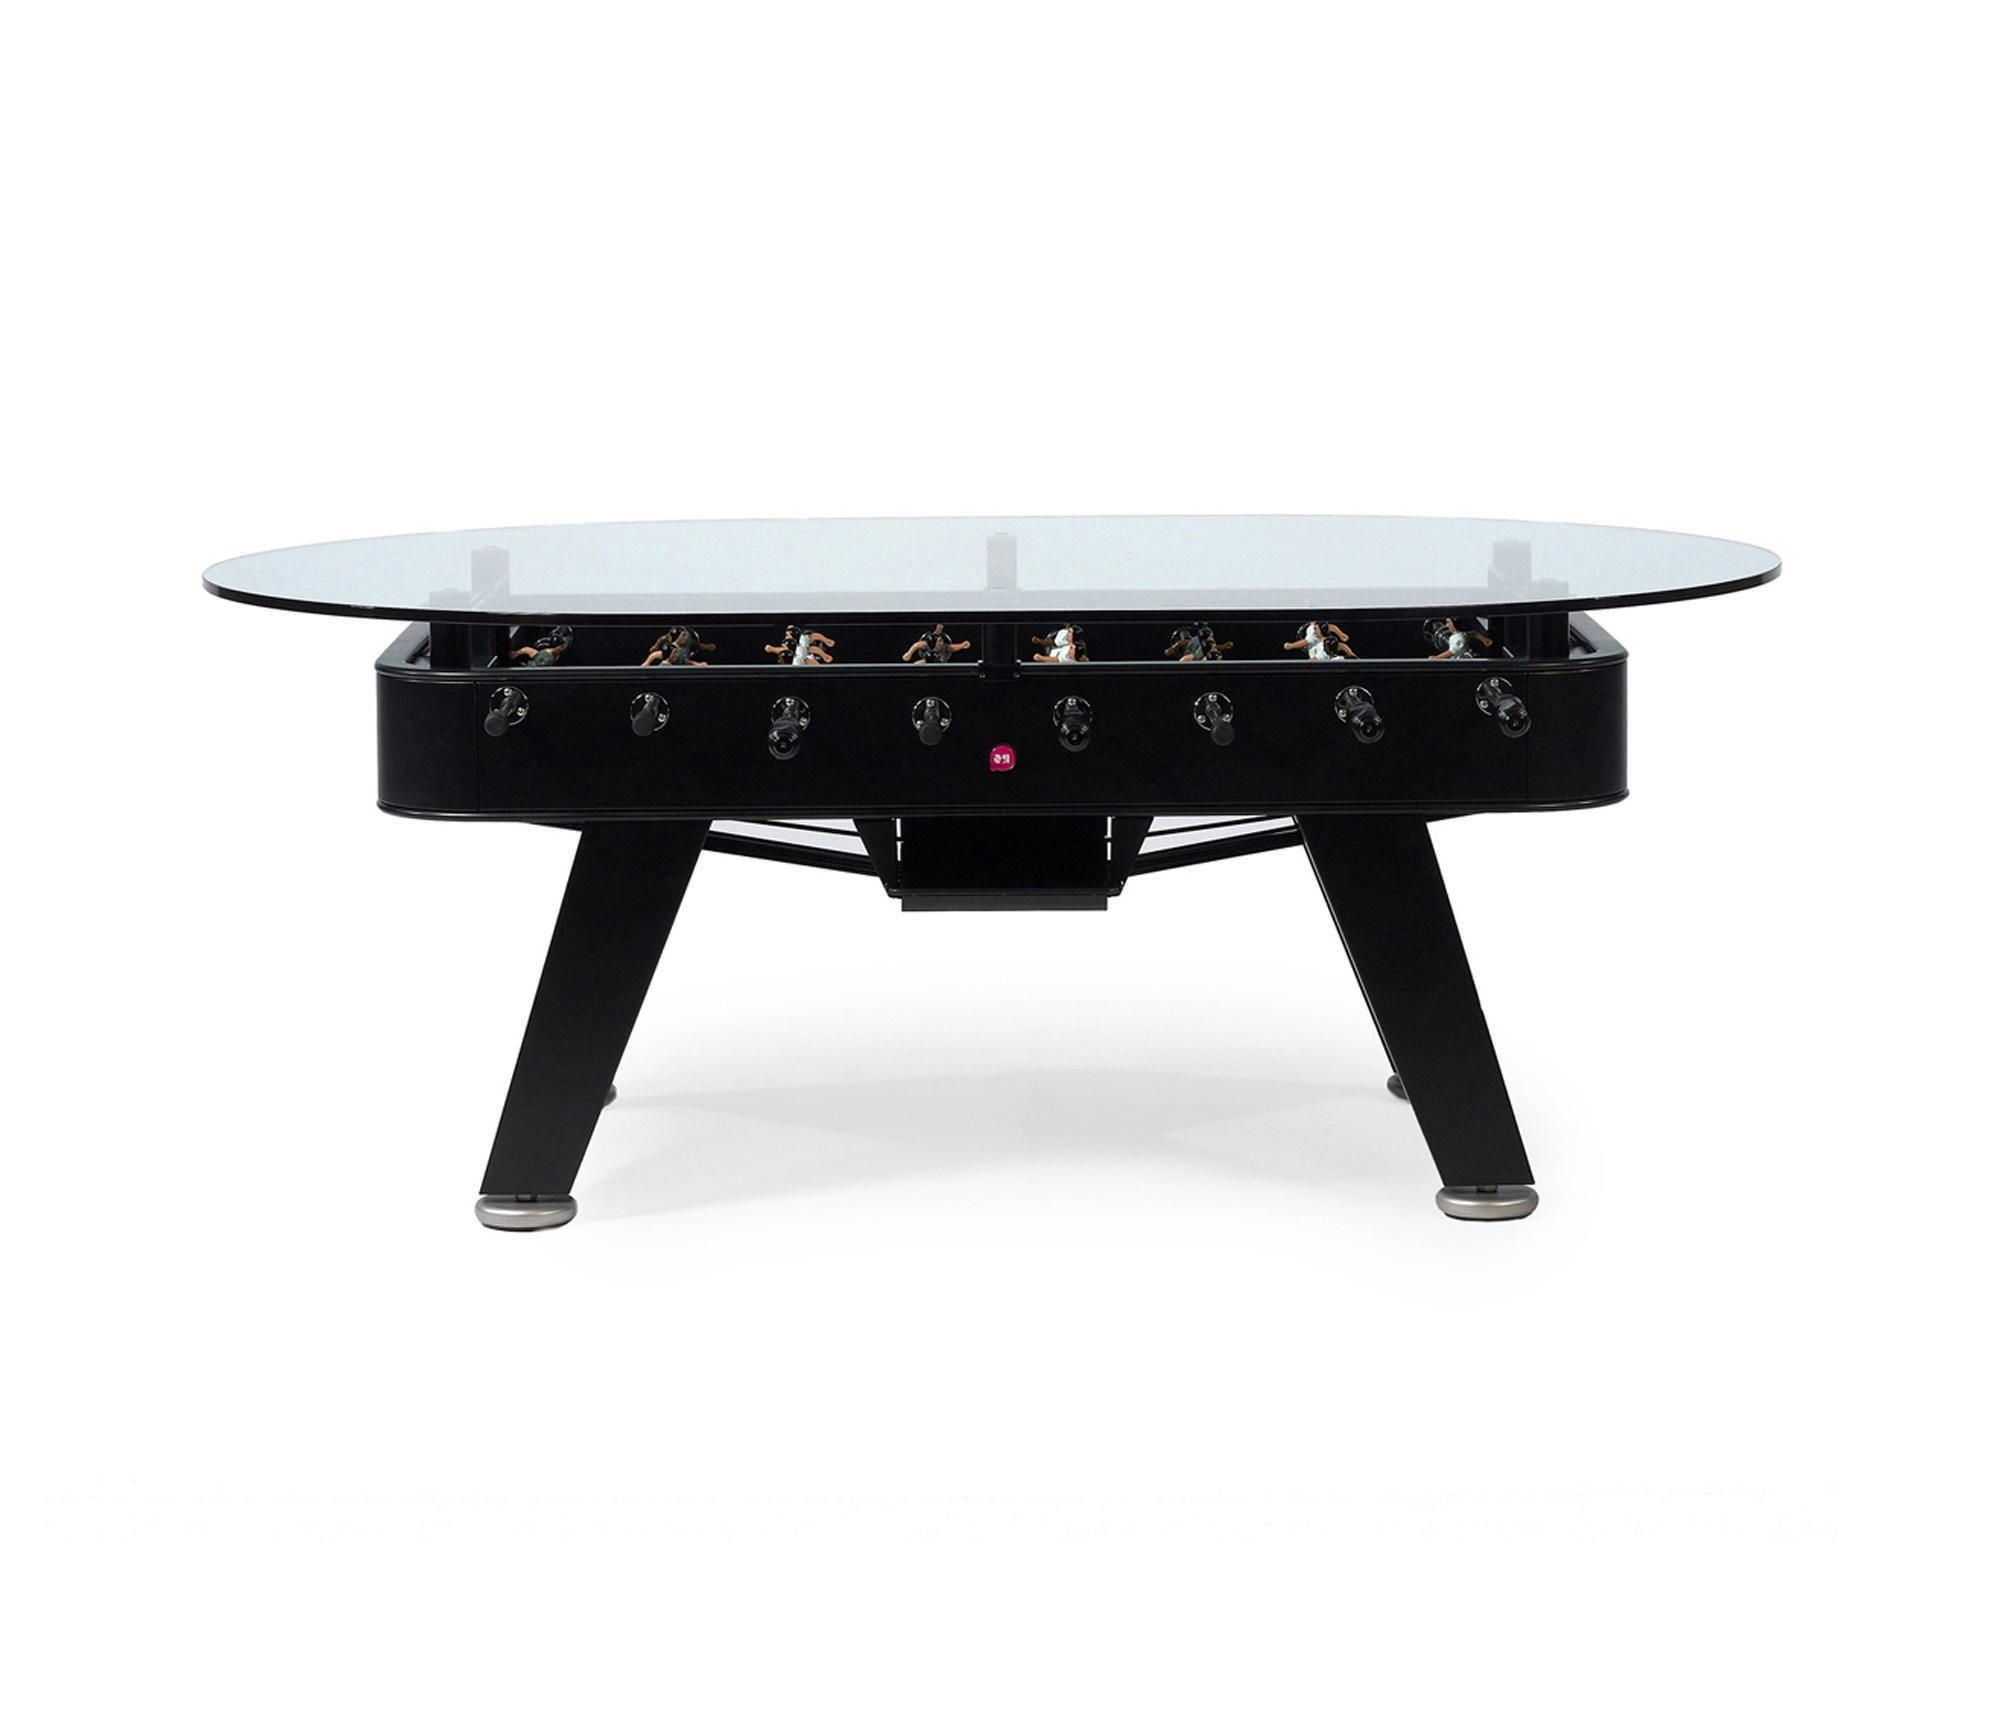 Architonic Intended For Best And Newest Barcelona Dining Tables (View 12 of 25)